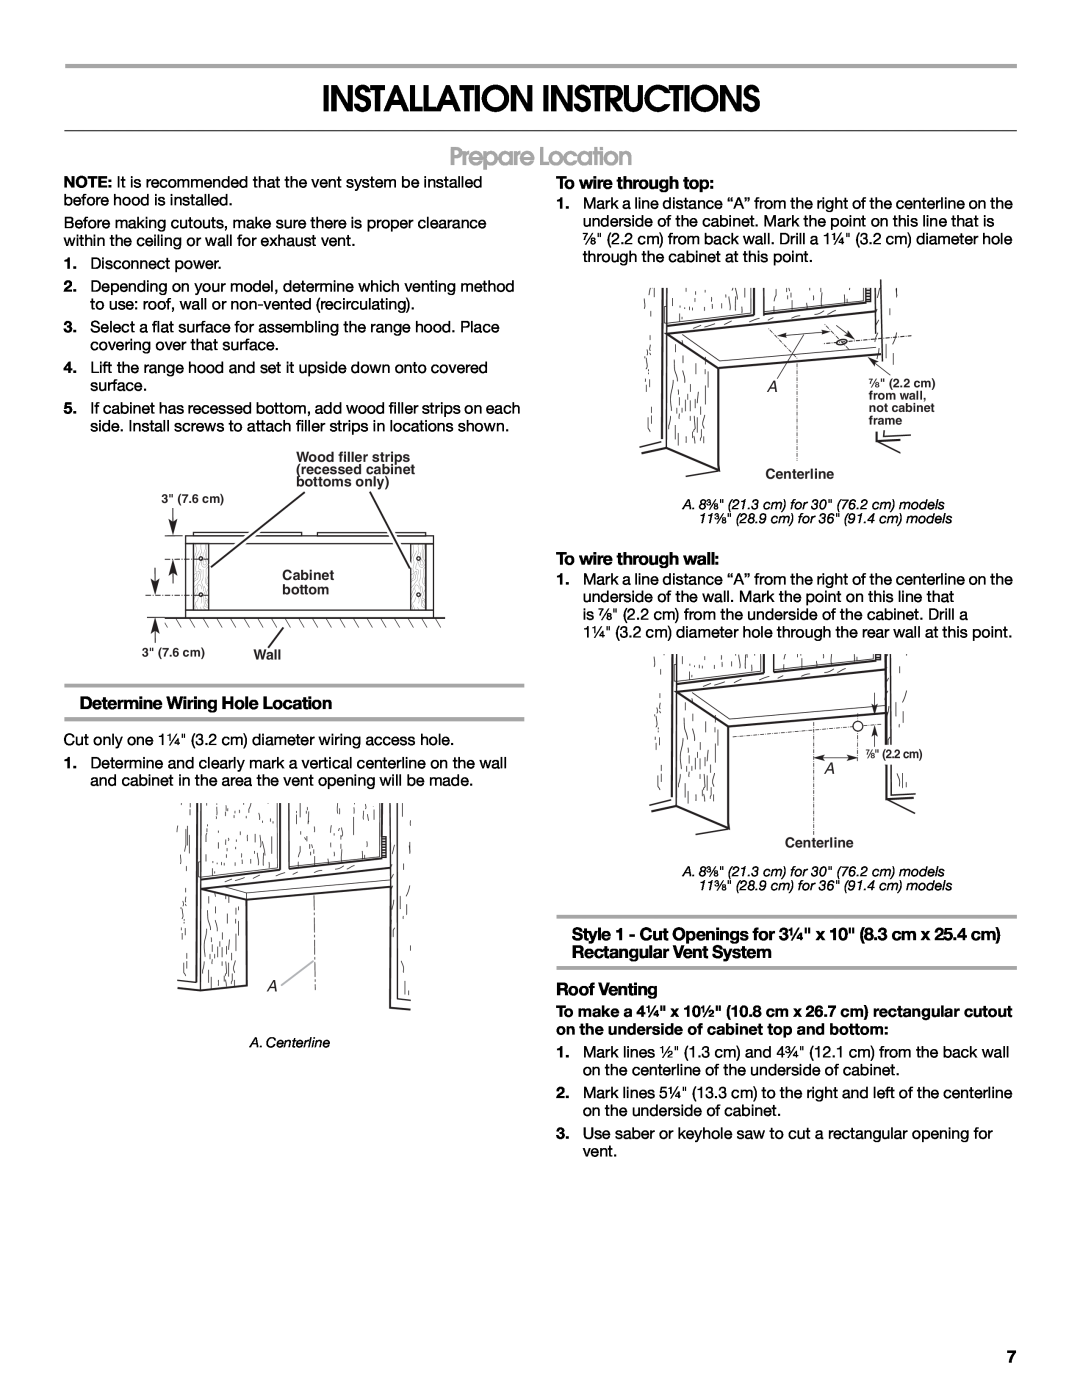 Whirlpool UXT5230AYW Installation Instructions, Prepare Location, To wire through top, To wire through wall, Roof Venting 